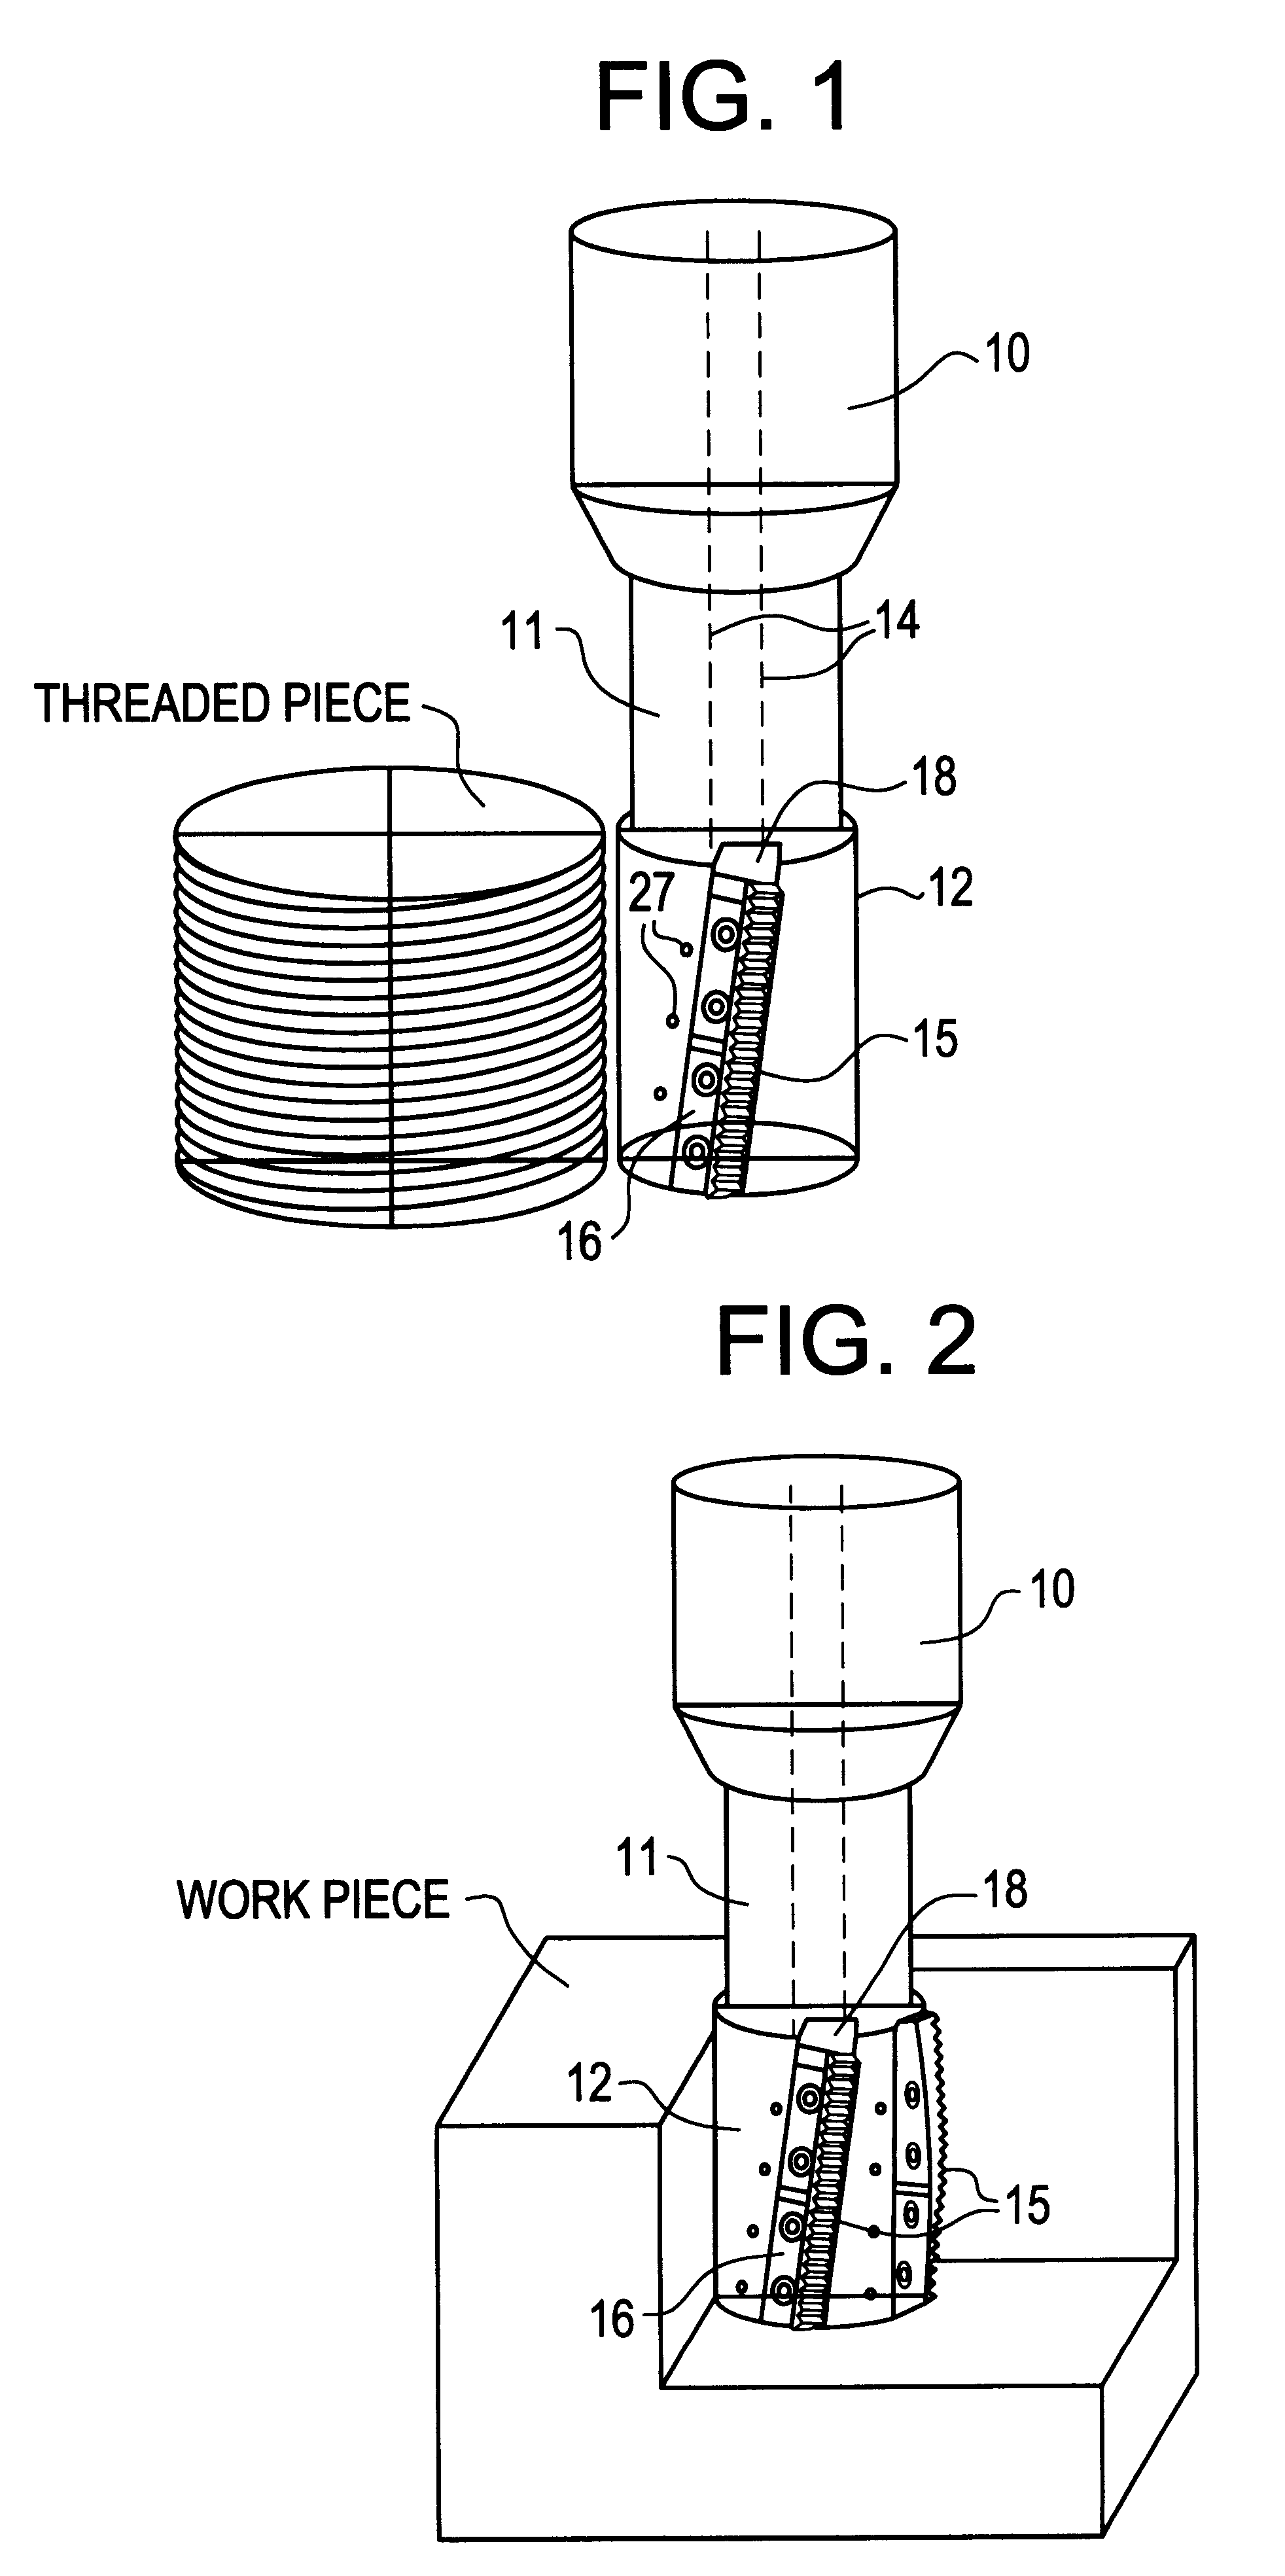 Tool with straight inserts for providing helical cutting action